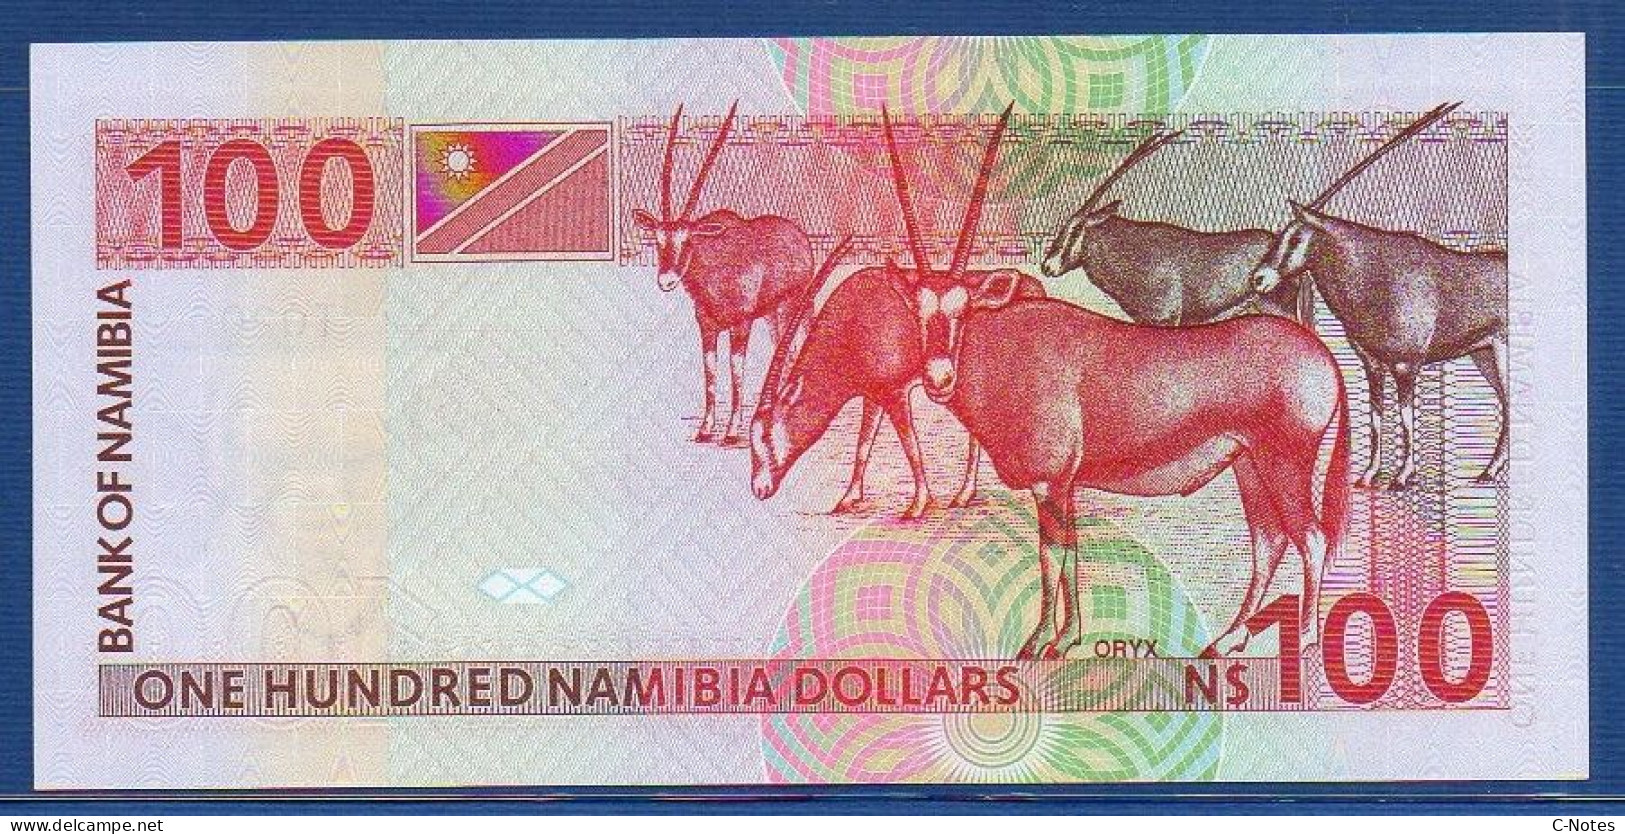 NAMIBIA - P. 3a – 100 Namibia Dollars ND (1993) UNC, S/n T0206397 - Namibia